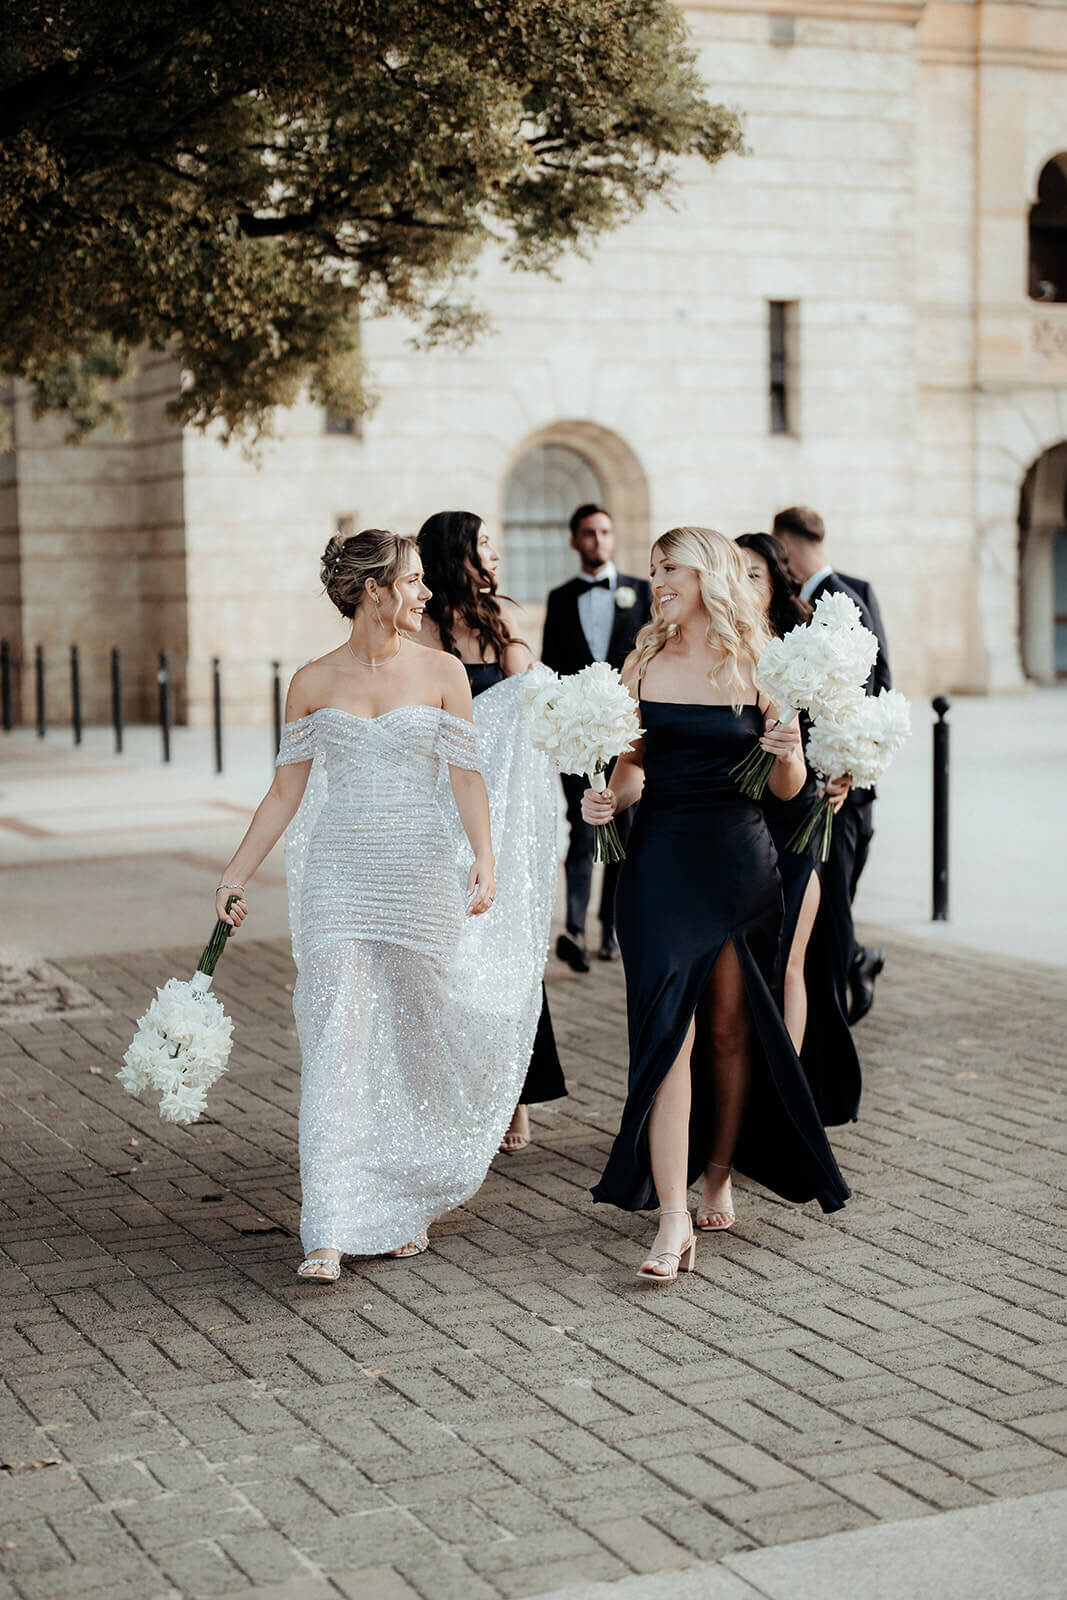 Bride walking with the bridal party